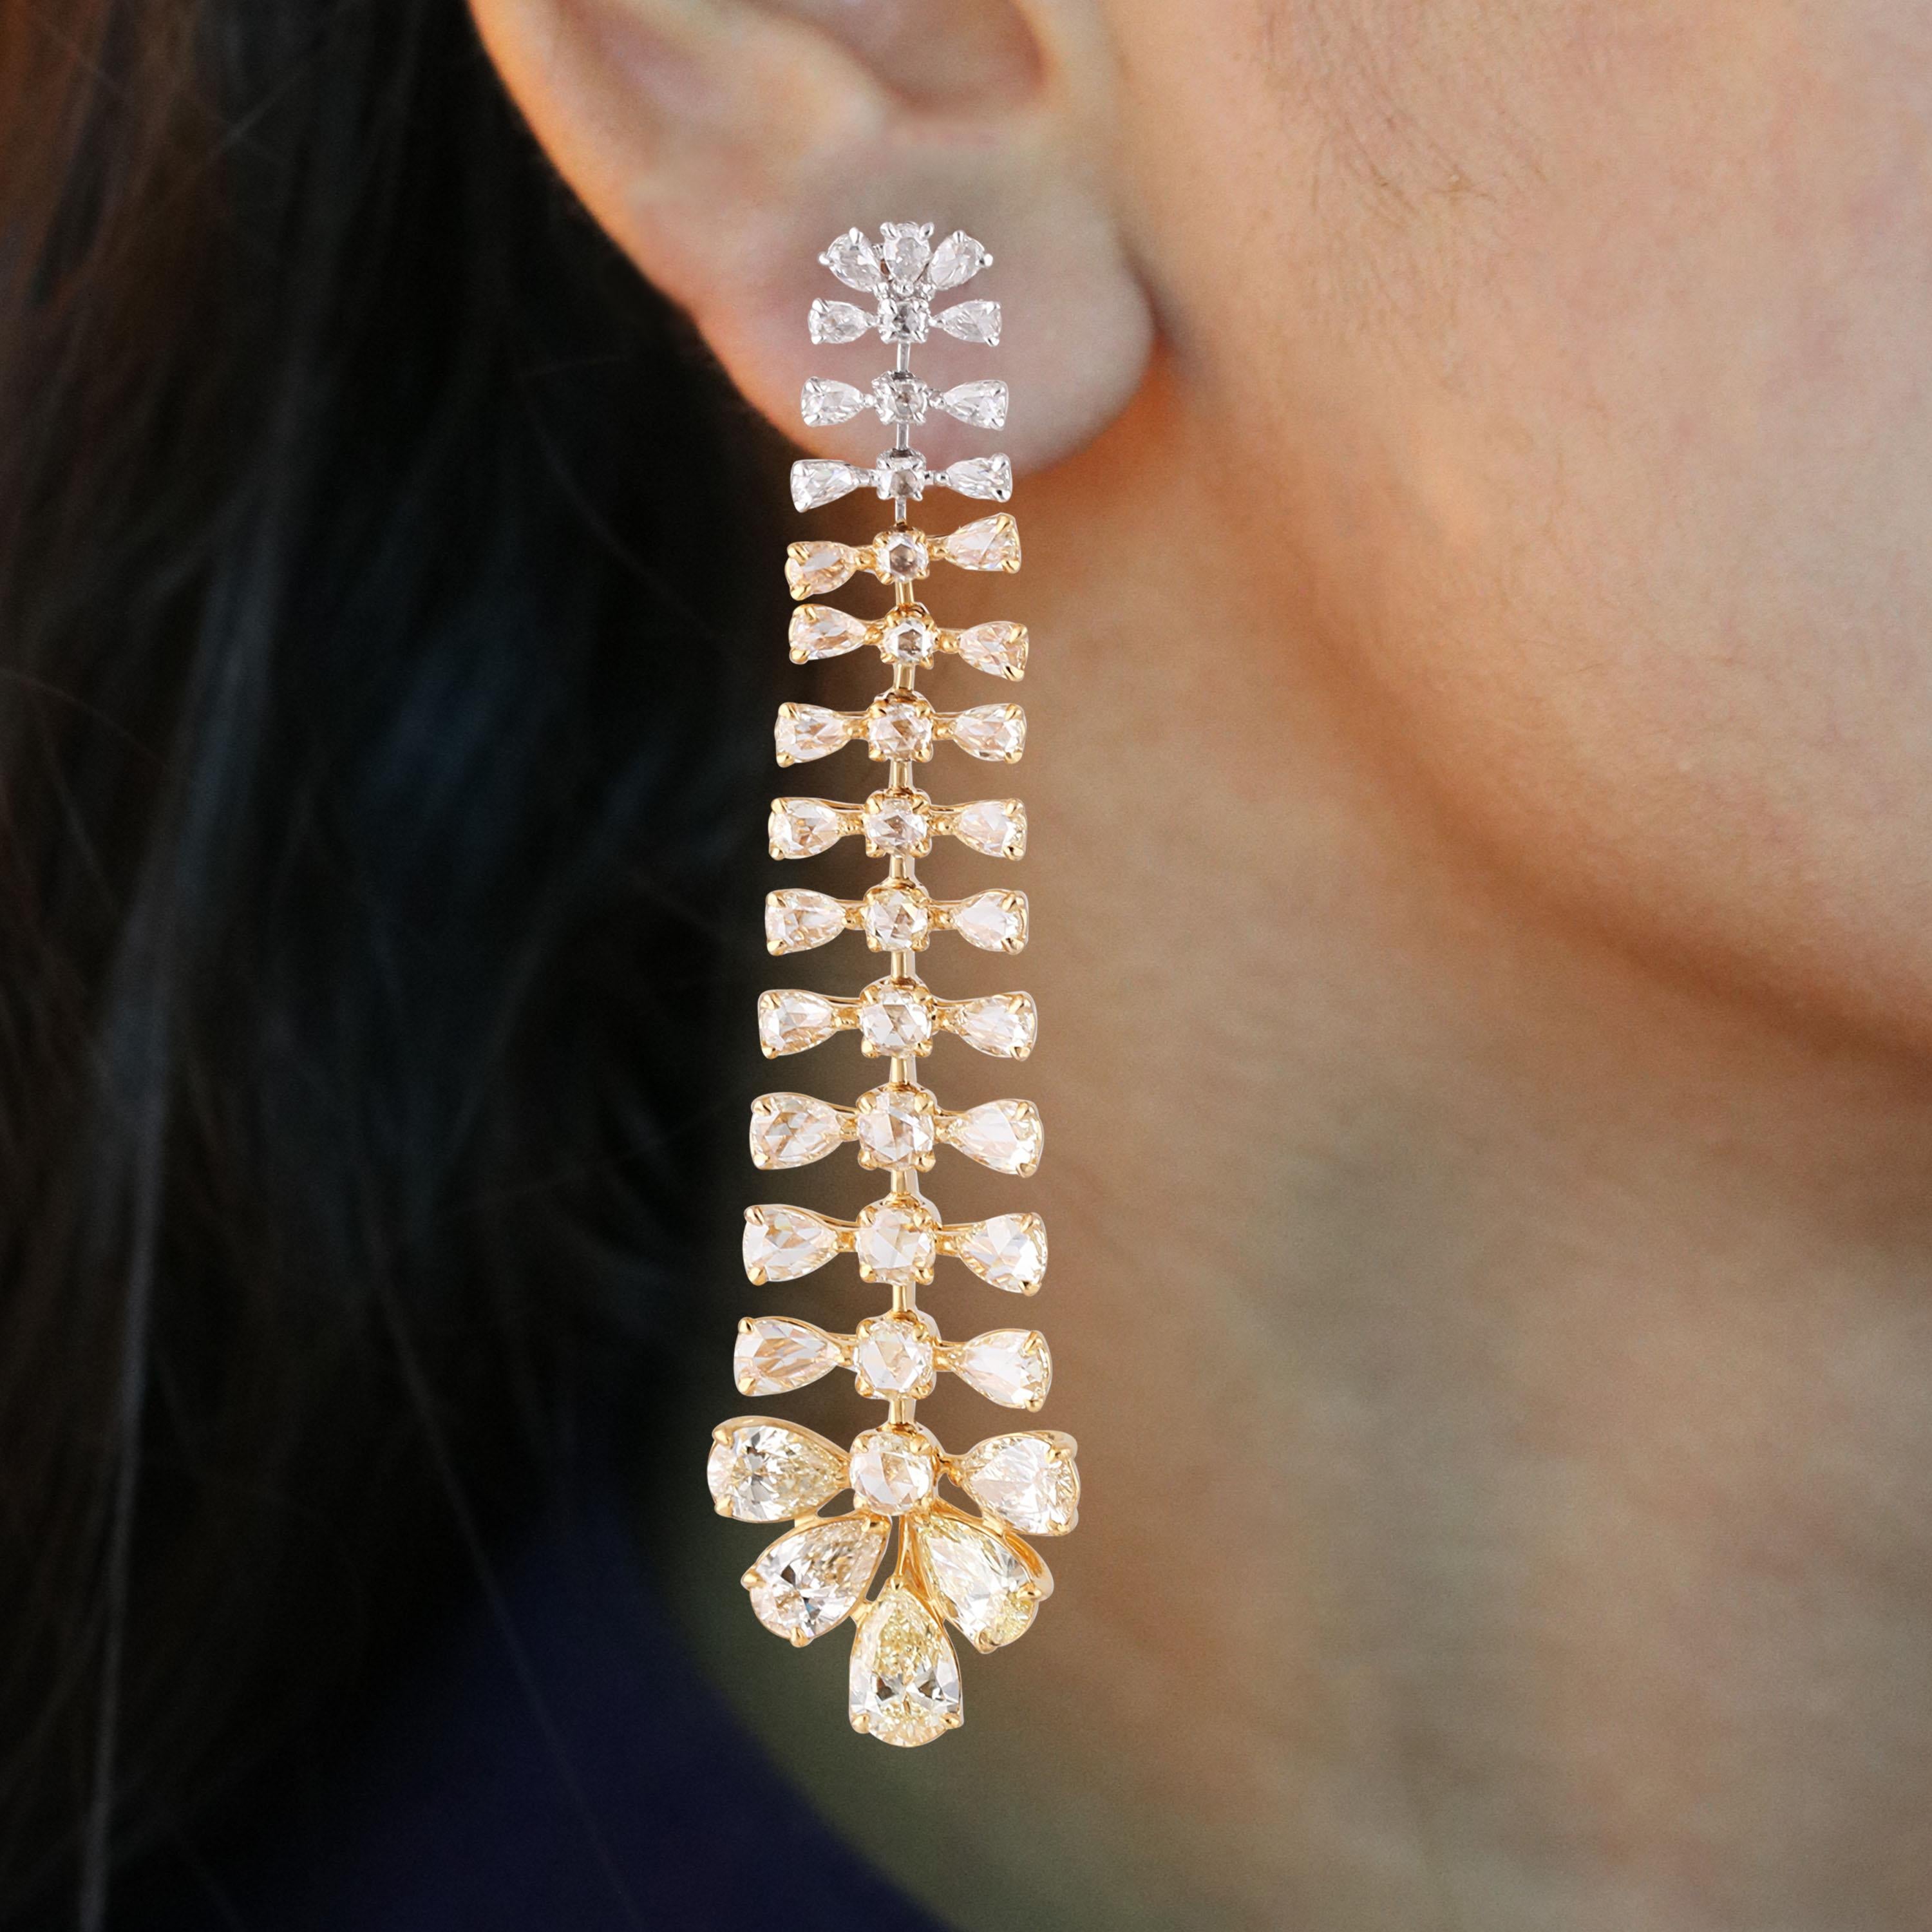 Gross Weight: 18.40 Grams
Diamond Weight: 8.04 cts
IGI Certification can be done on request.

Videos can be done on request.

Keeping it simple, never looked as elegant as this pair of 18K white and yellow gold earrings adorned with white and yellow